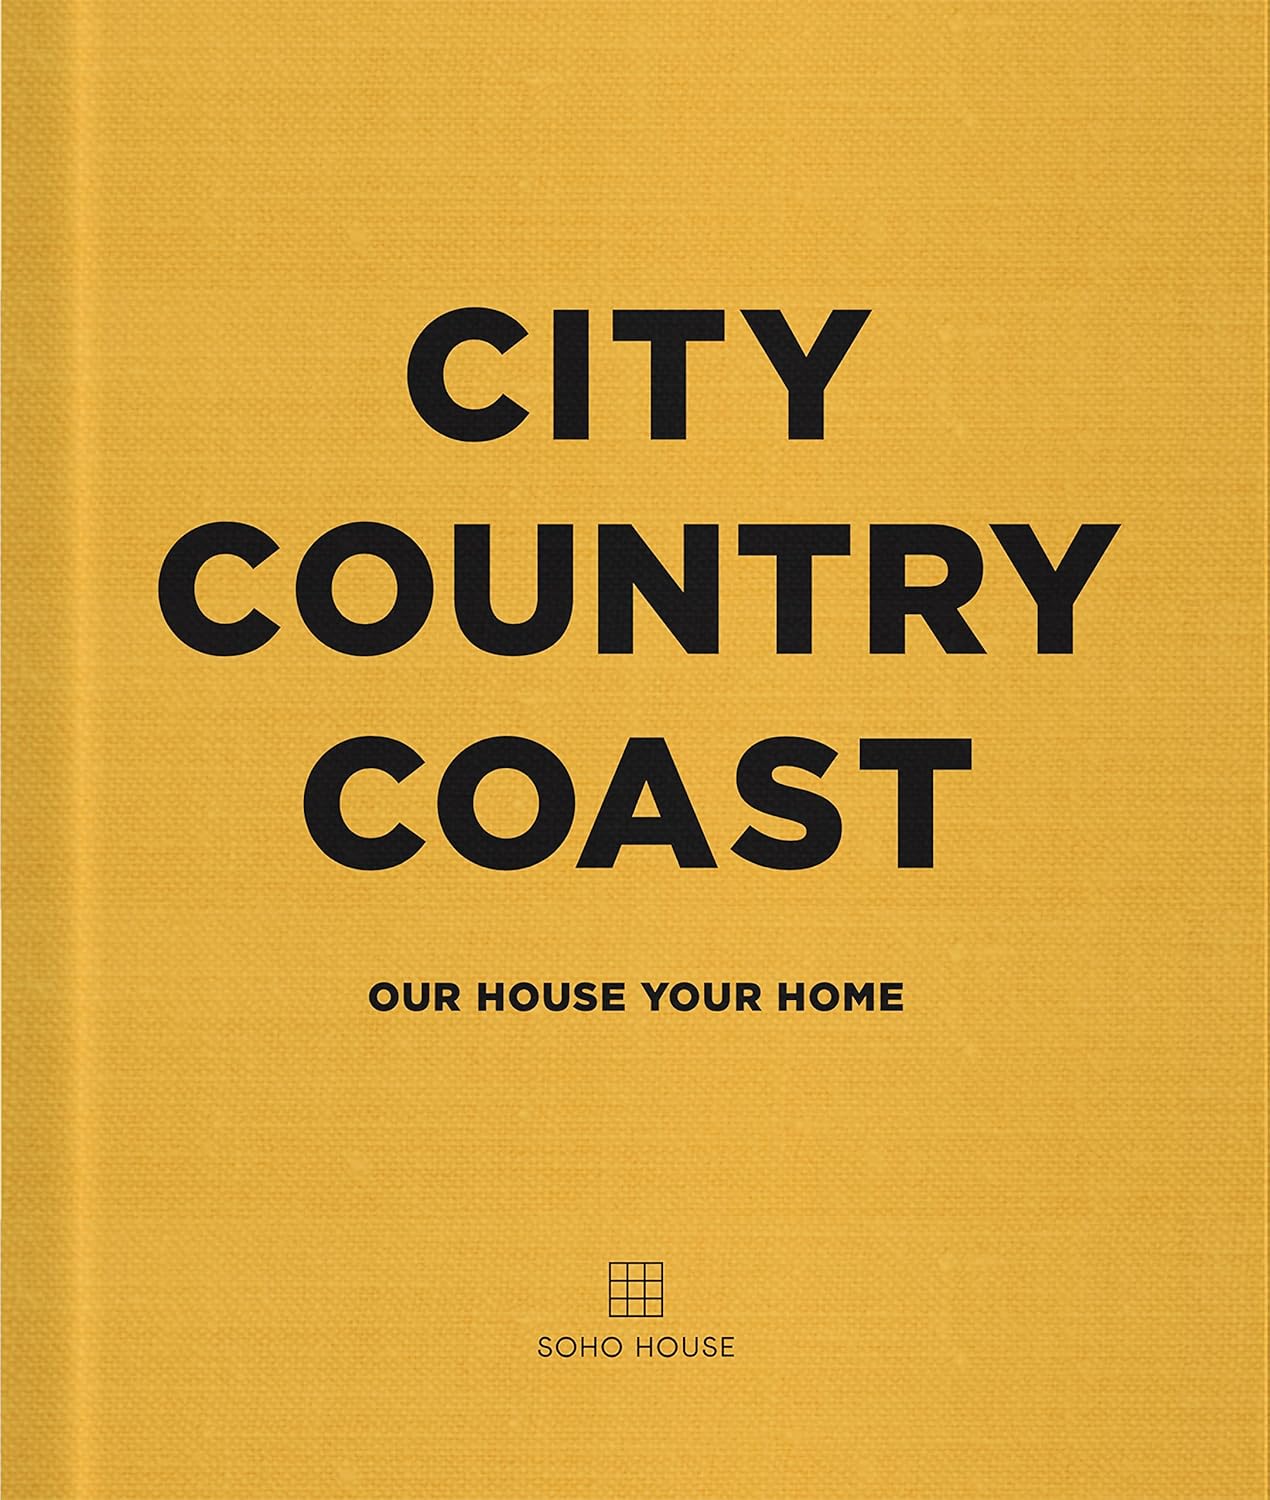 City Country Coast - Our House Your Home Book By Soho House